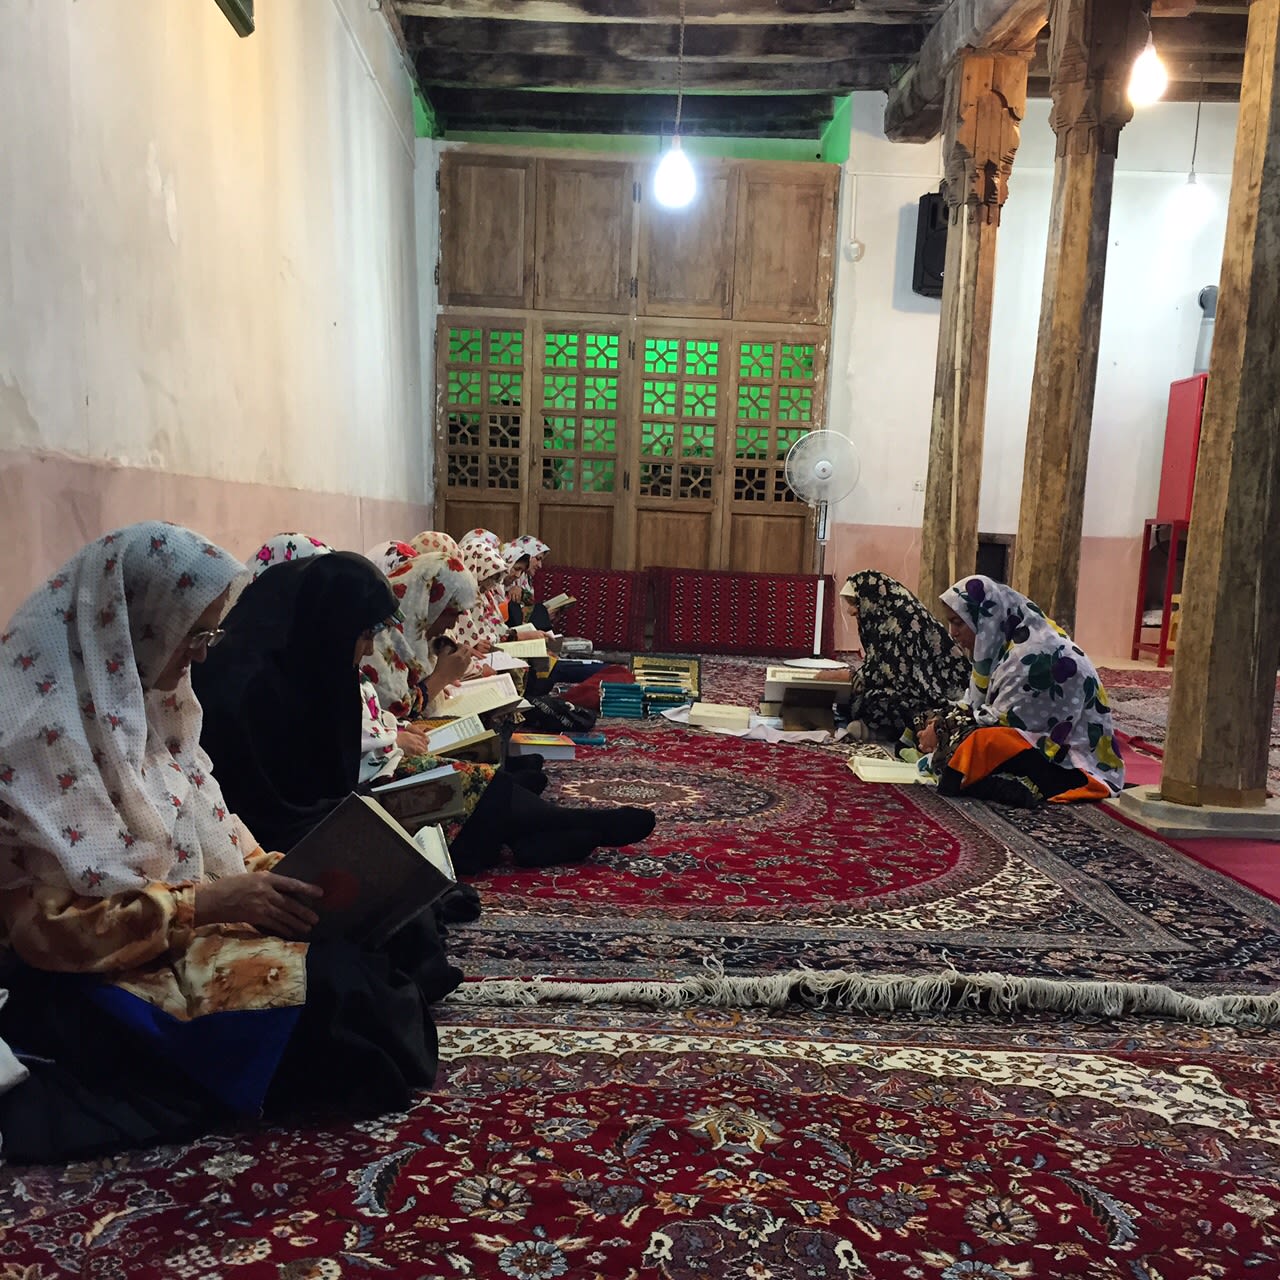 CNN manages to get access to a women-only lesson on the Quran, the Muslim holy book, at the biggest and oldest mosque in the village.